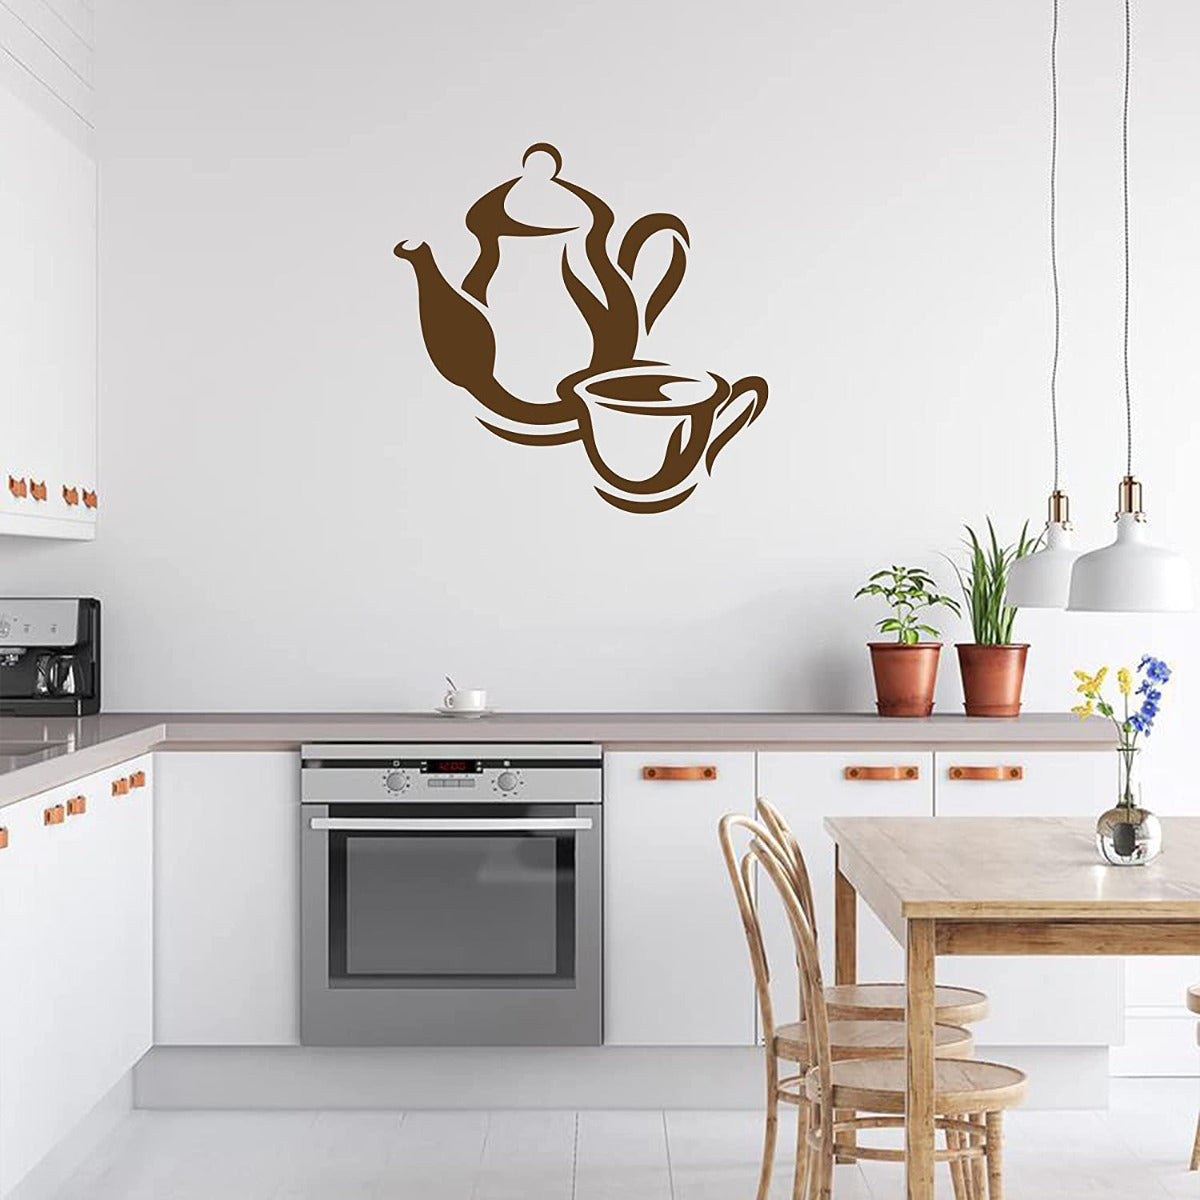 Teapot and Teacup Outline Wall Sticker